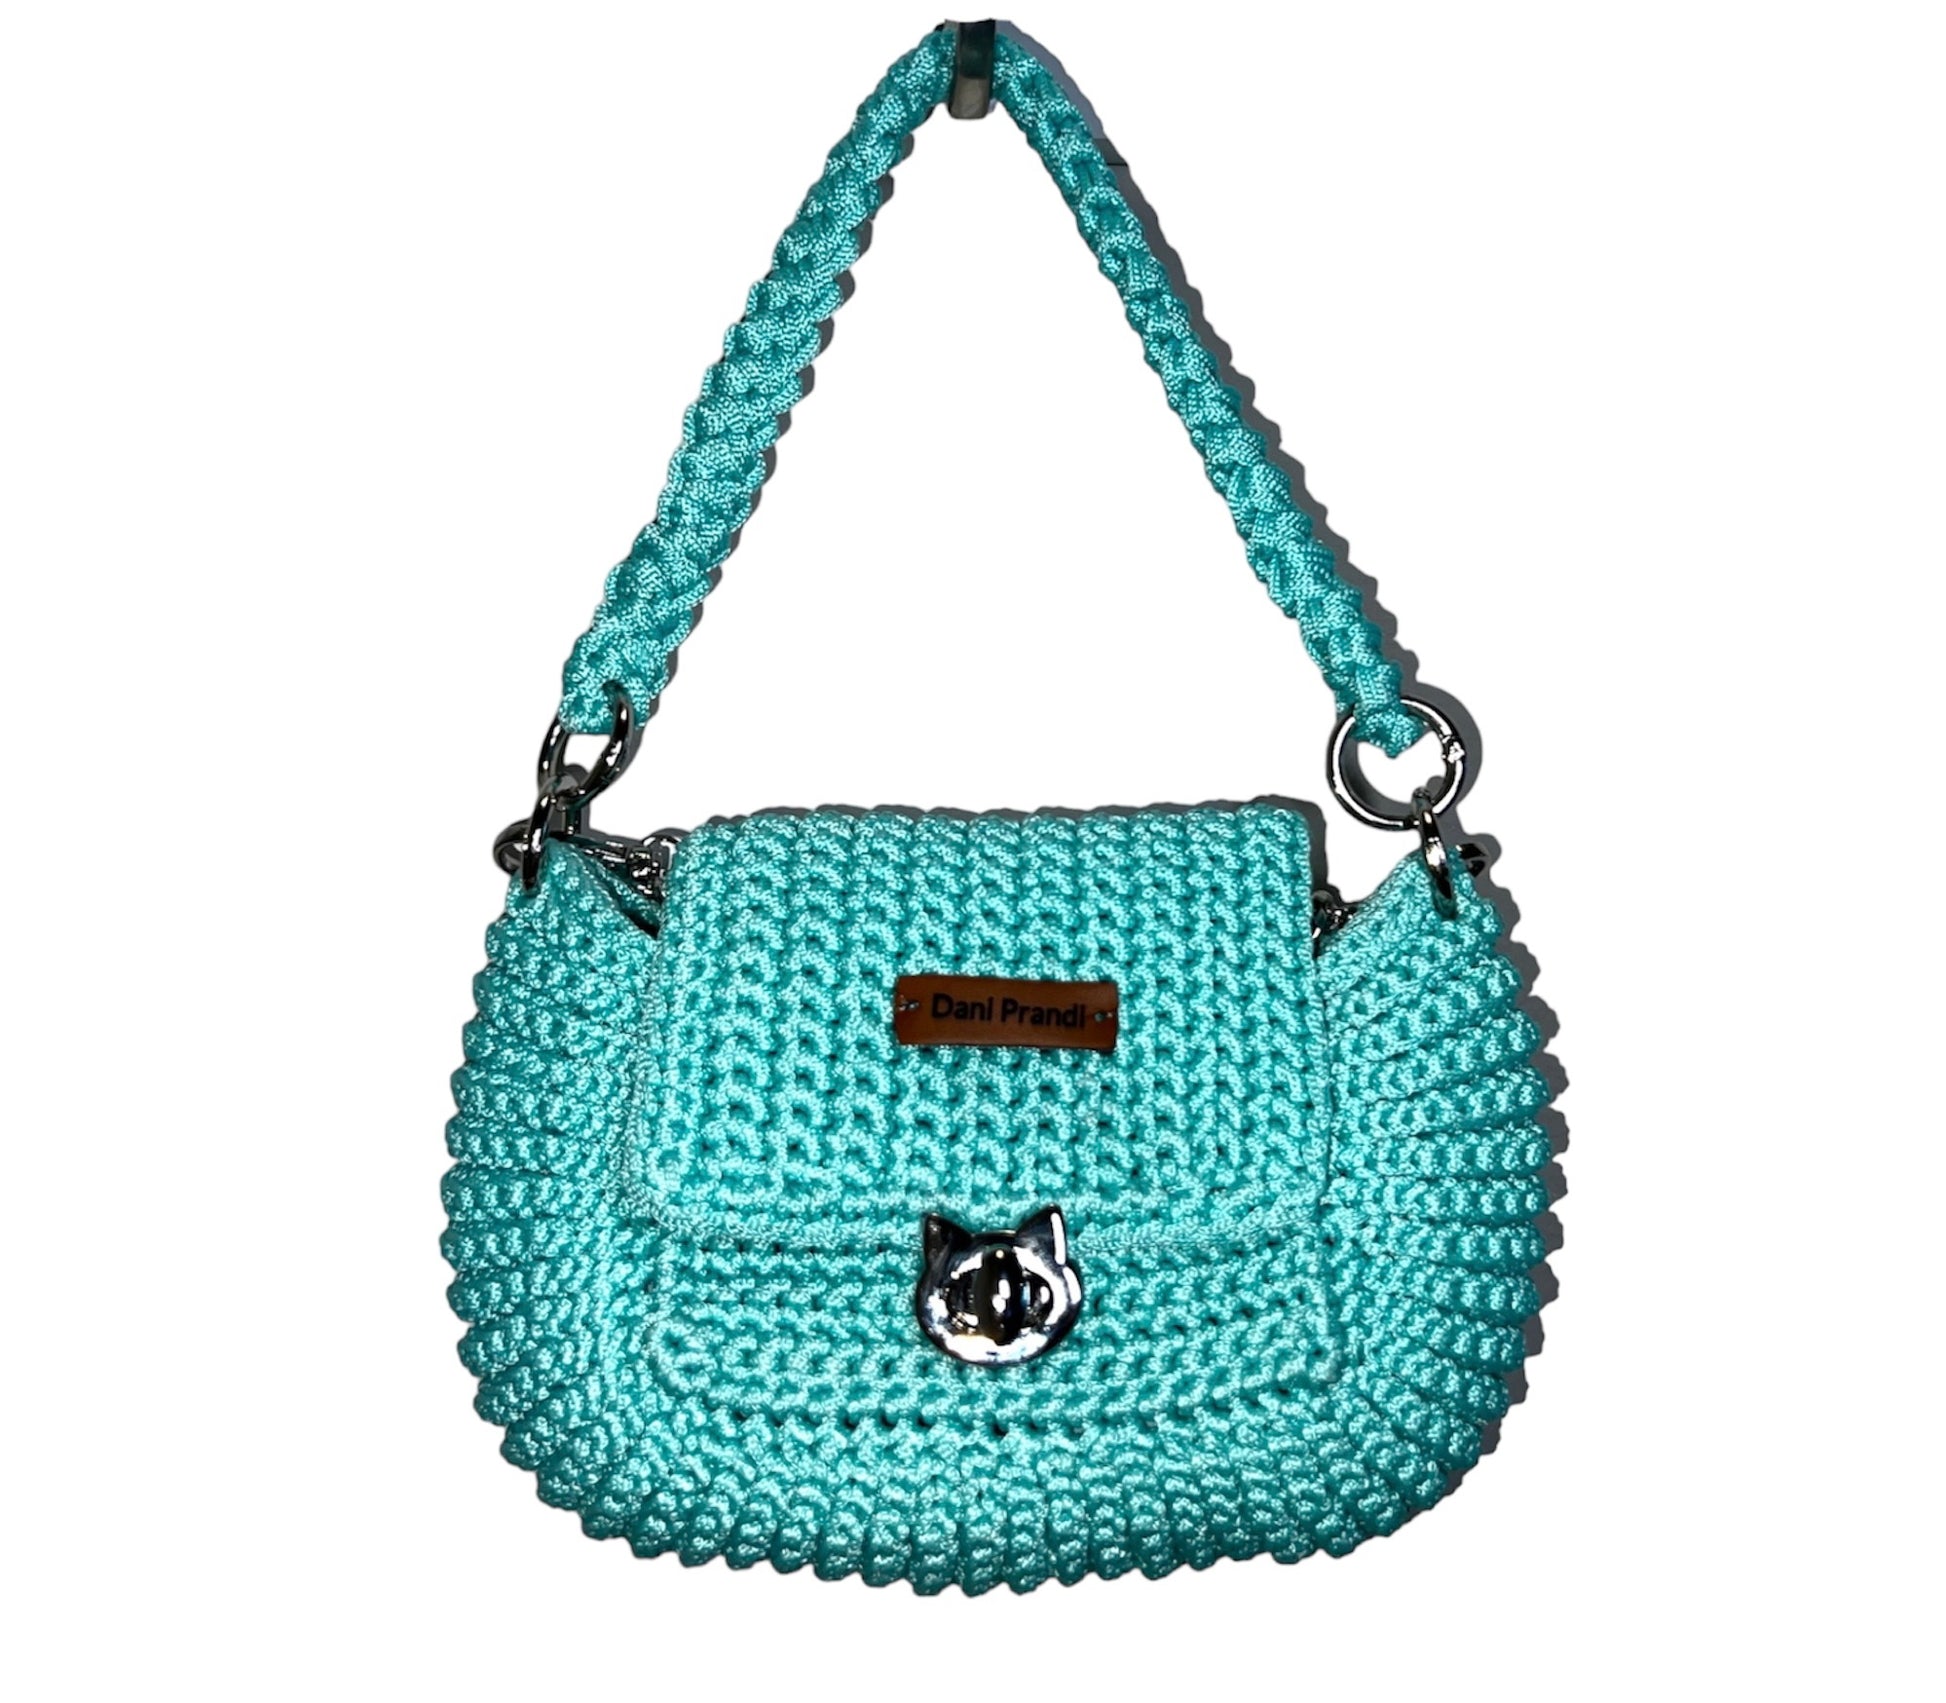 mini crochet embroidered bag in a captivating aqua green hue. The bag is adorned with a metal chain and features a closure bearing the distinctive symbol of our Catwalks Cat brand. Lined with luxurious acetinated fabric, this mini bag is a testament to unique craftsmanship and fashion sophistication.